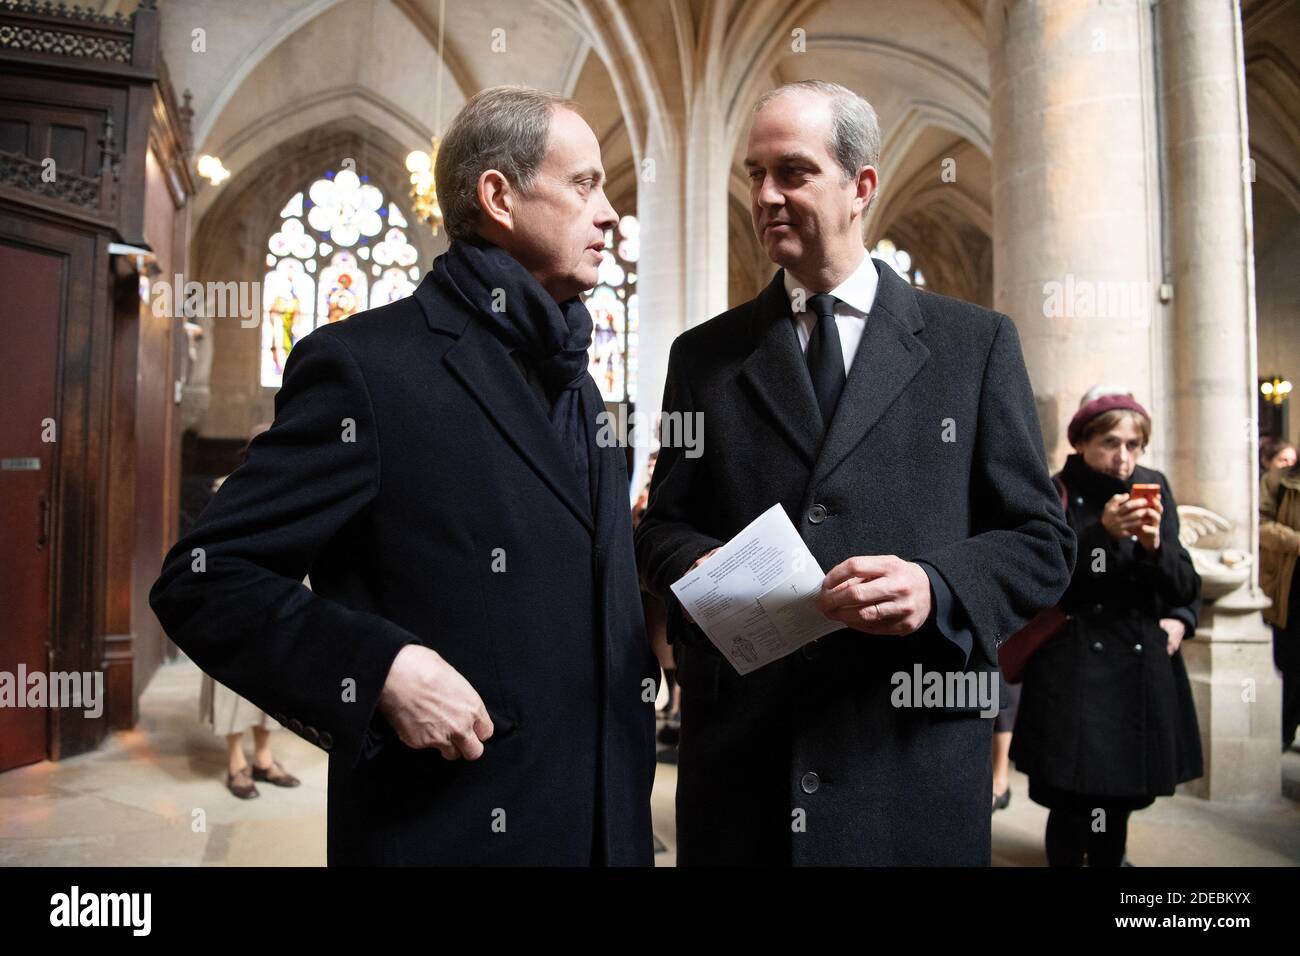 Count of Paris, Prince Jean of Orleans and Prince Eudes of Orleans attend  the Mass ' Messe pour le repos de l'ame ' for their father Count of Paris,  Prince Henri d'